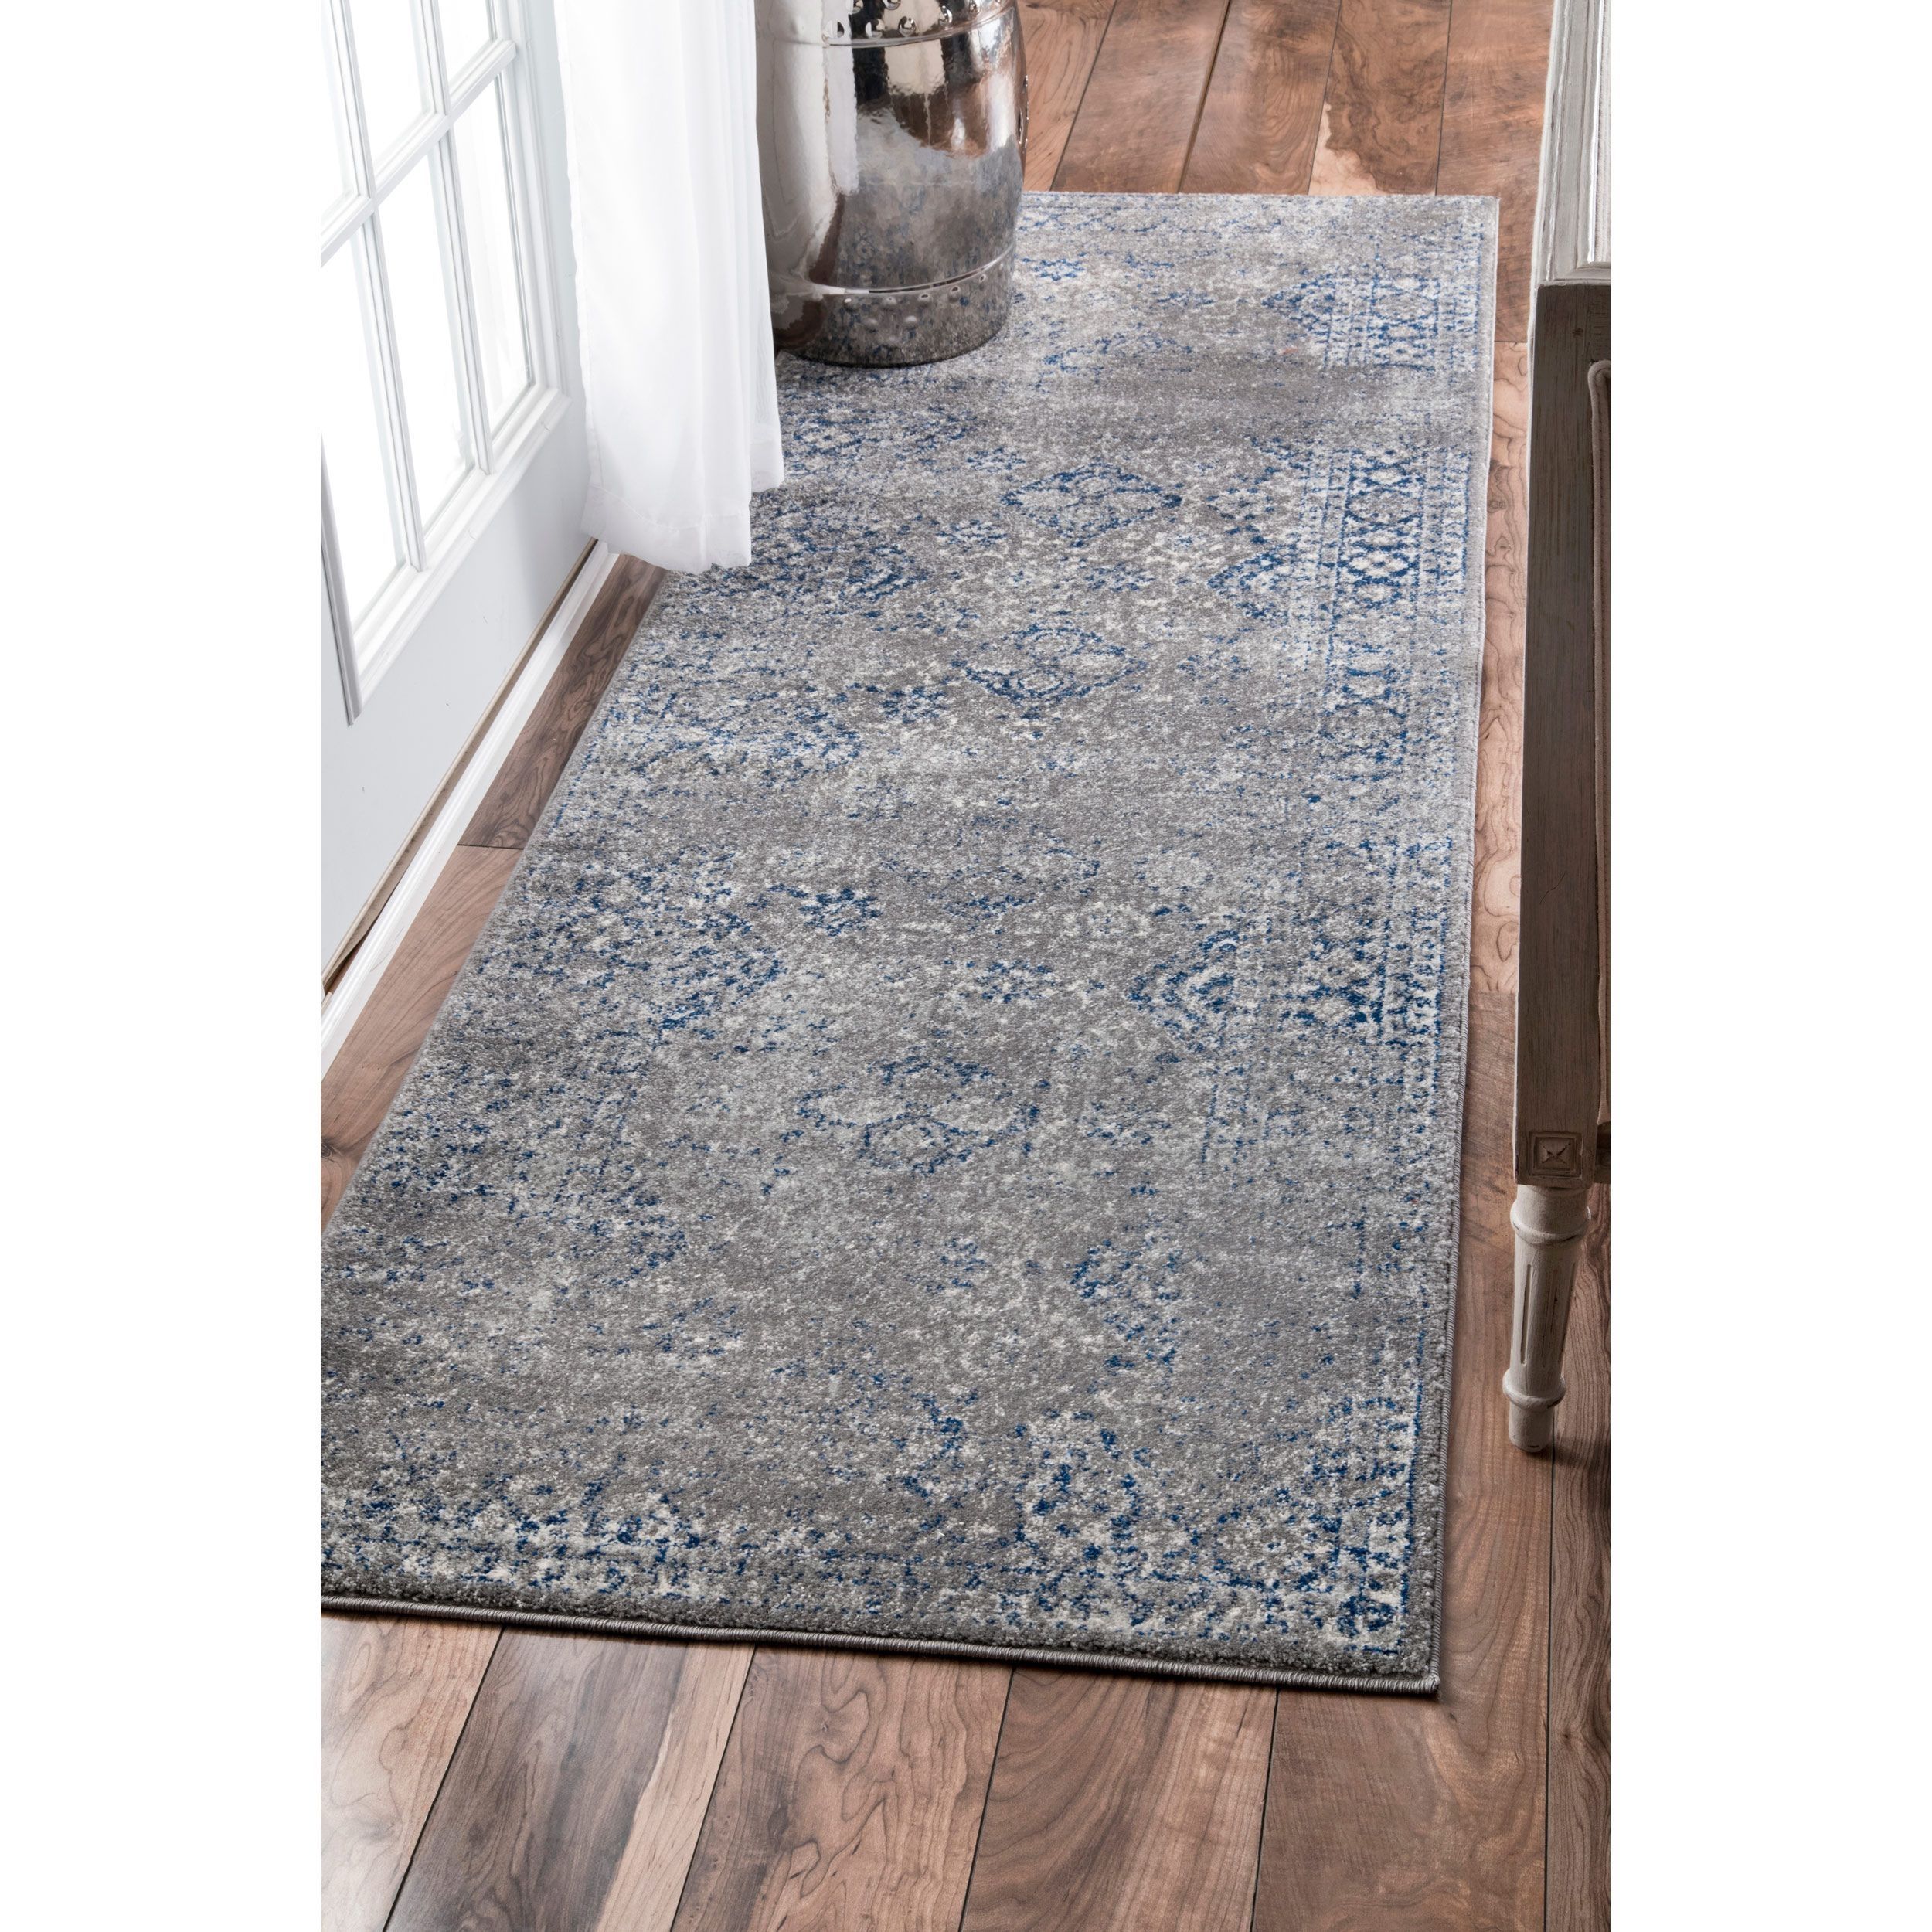 Kitchen Kitchen Appliances Kitchen Accent Rugs Blue Kitchen Rugs With Regard To Hall Runners And Door Mats (View 11 of 20)